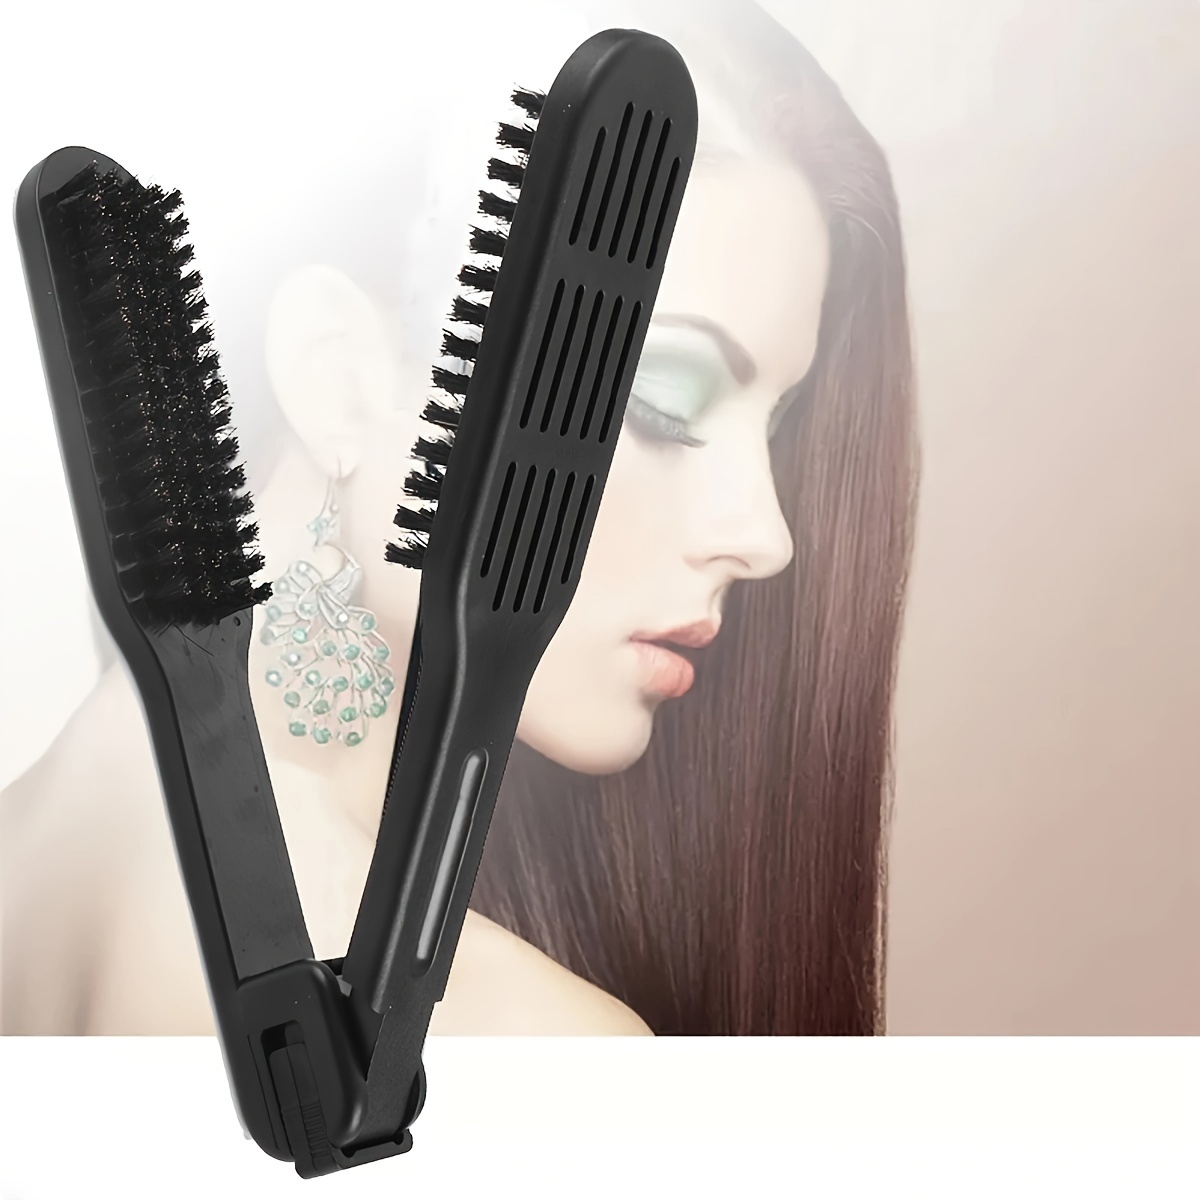 

Clip Board Comb, Hair Salon Special V-shaped Clip Comb, Straightening Comb, Straight Hair Styling Multifunctional Comb, Folding Straight Hair Comb 1pc